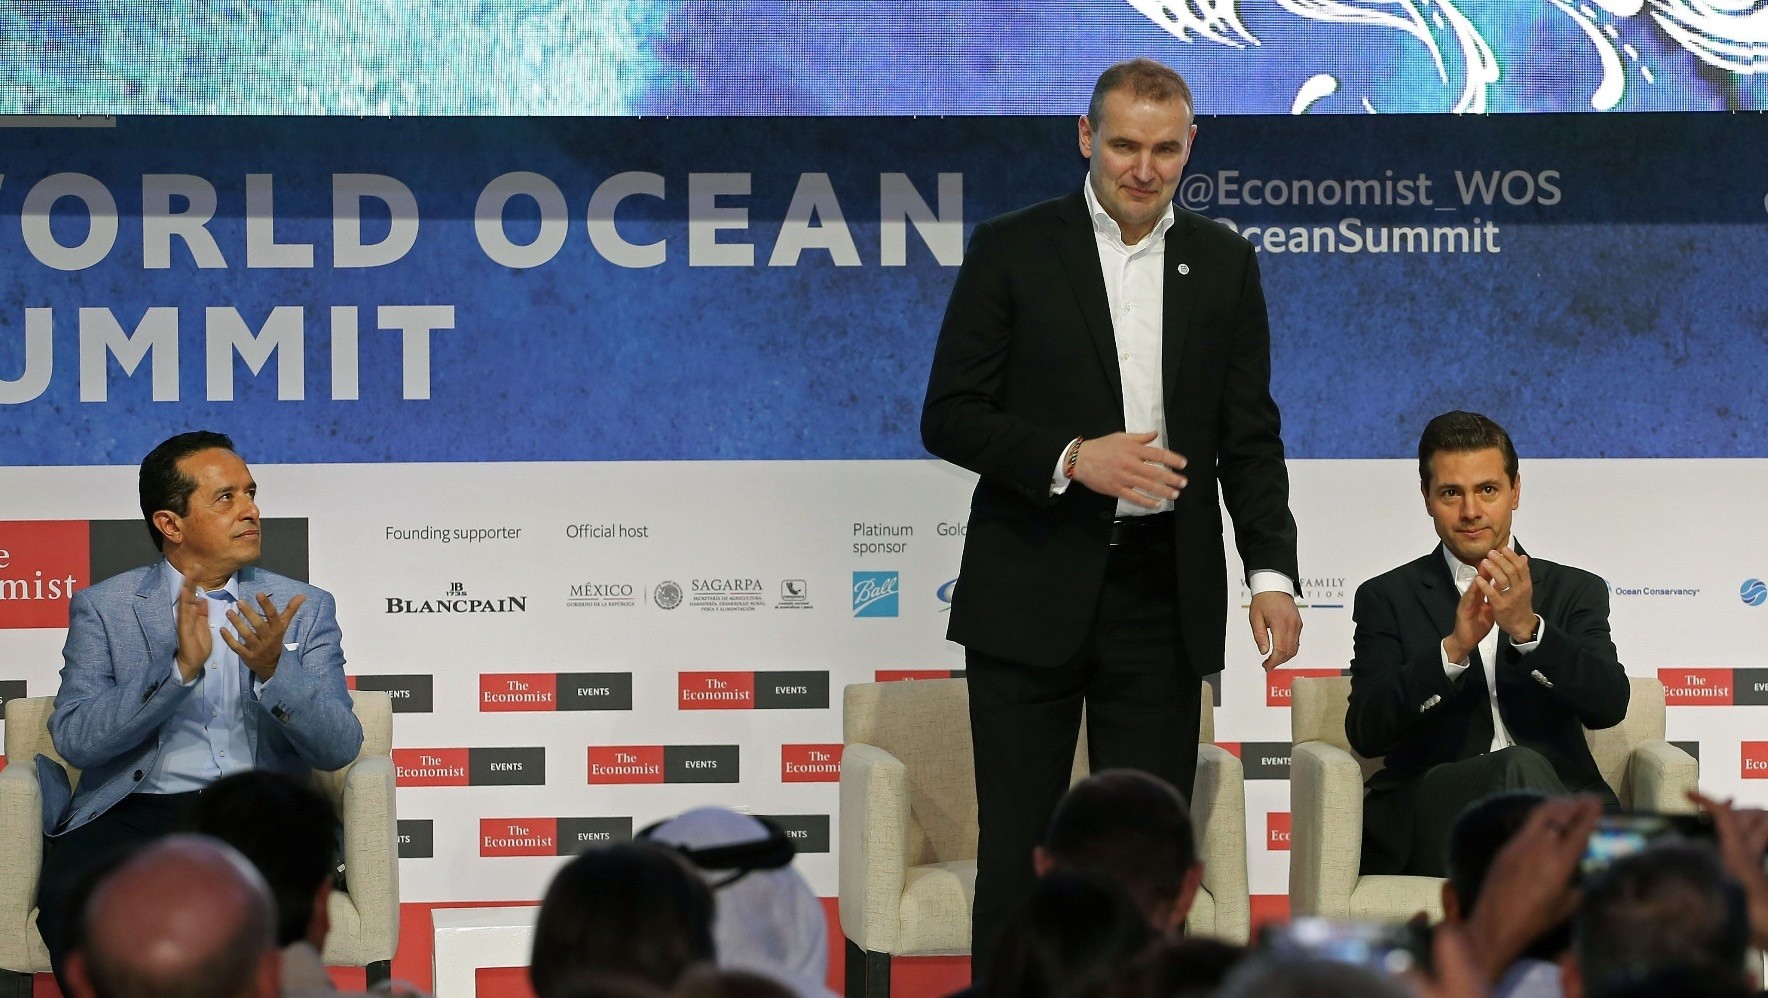 Mexican President Enrique Pena Nieto (R) applauds Icelandu2019s President Gudni Johannesson (C), during the opening ceremony of the World Ocean Summit in Playa del Carmen, Mexico on March 8.